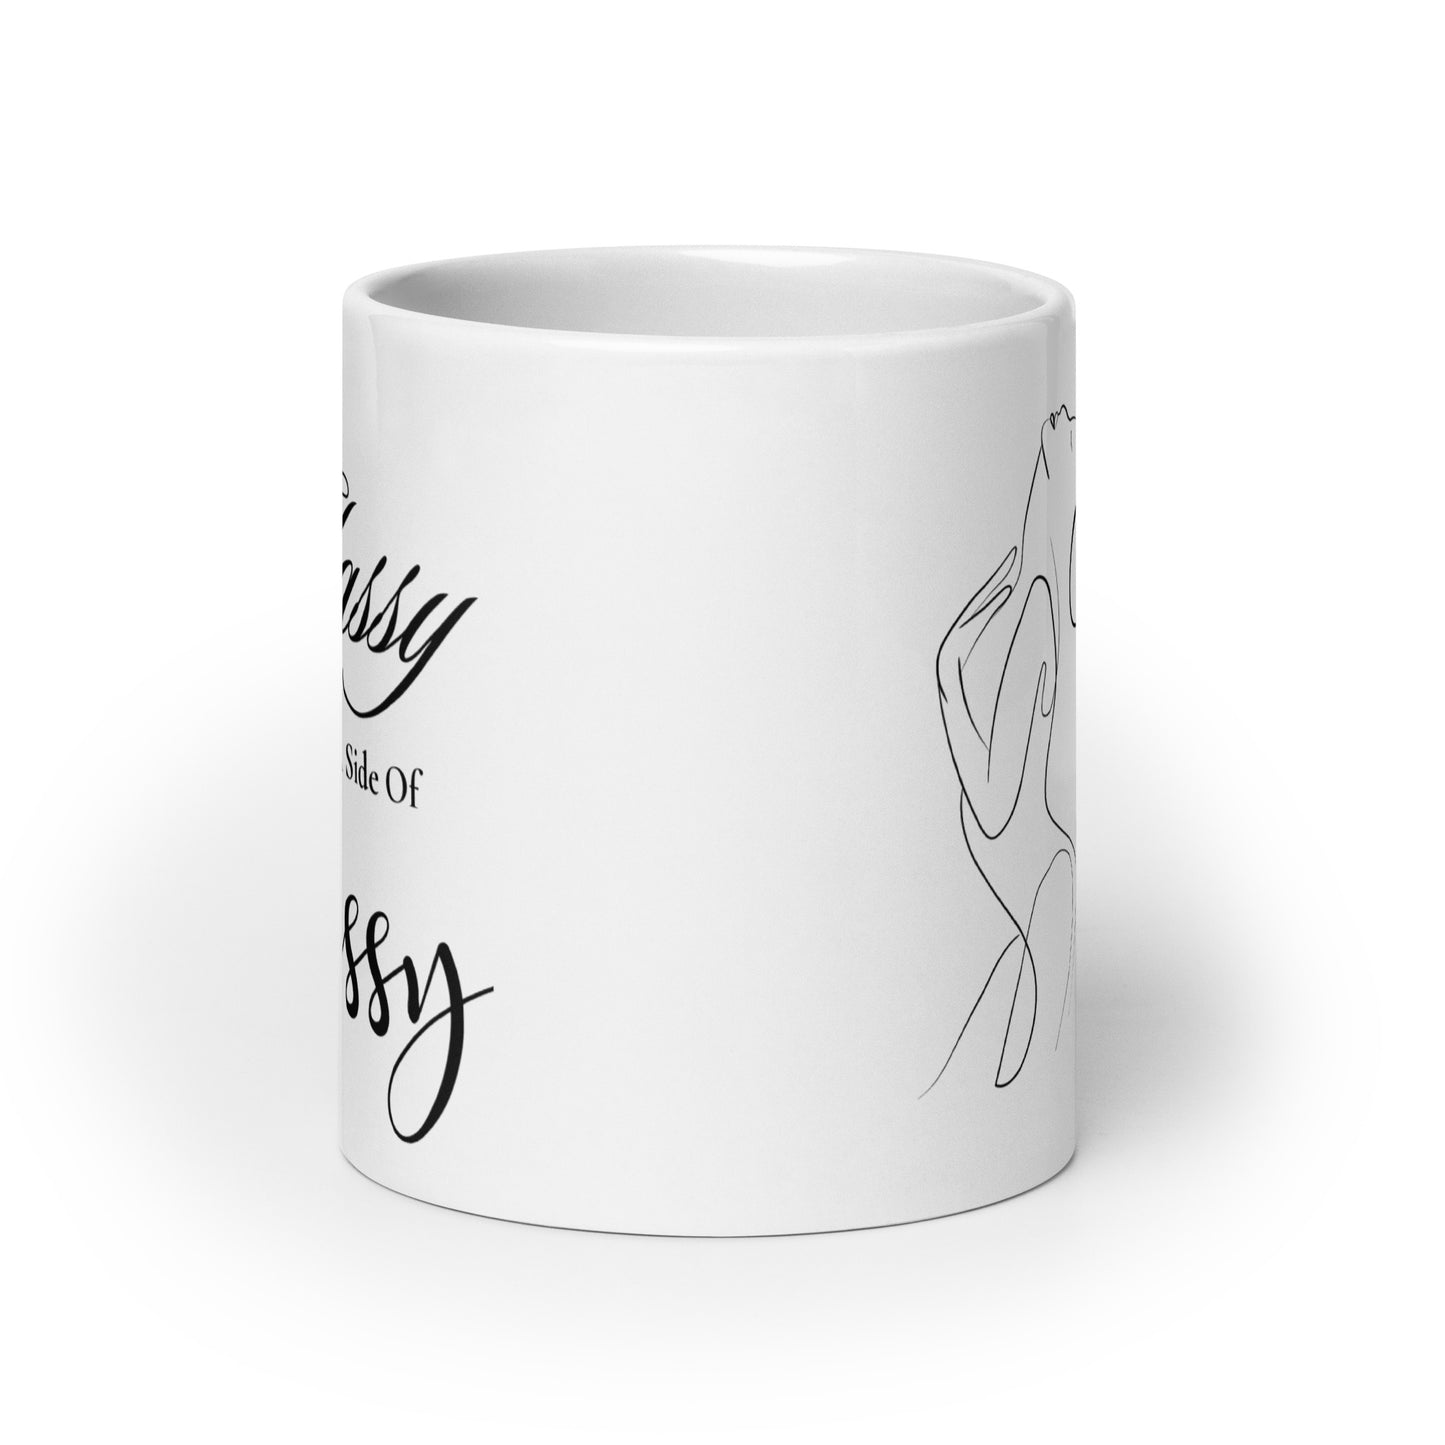 Classy with a side of Sassy Sexy White glossy mug